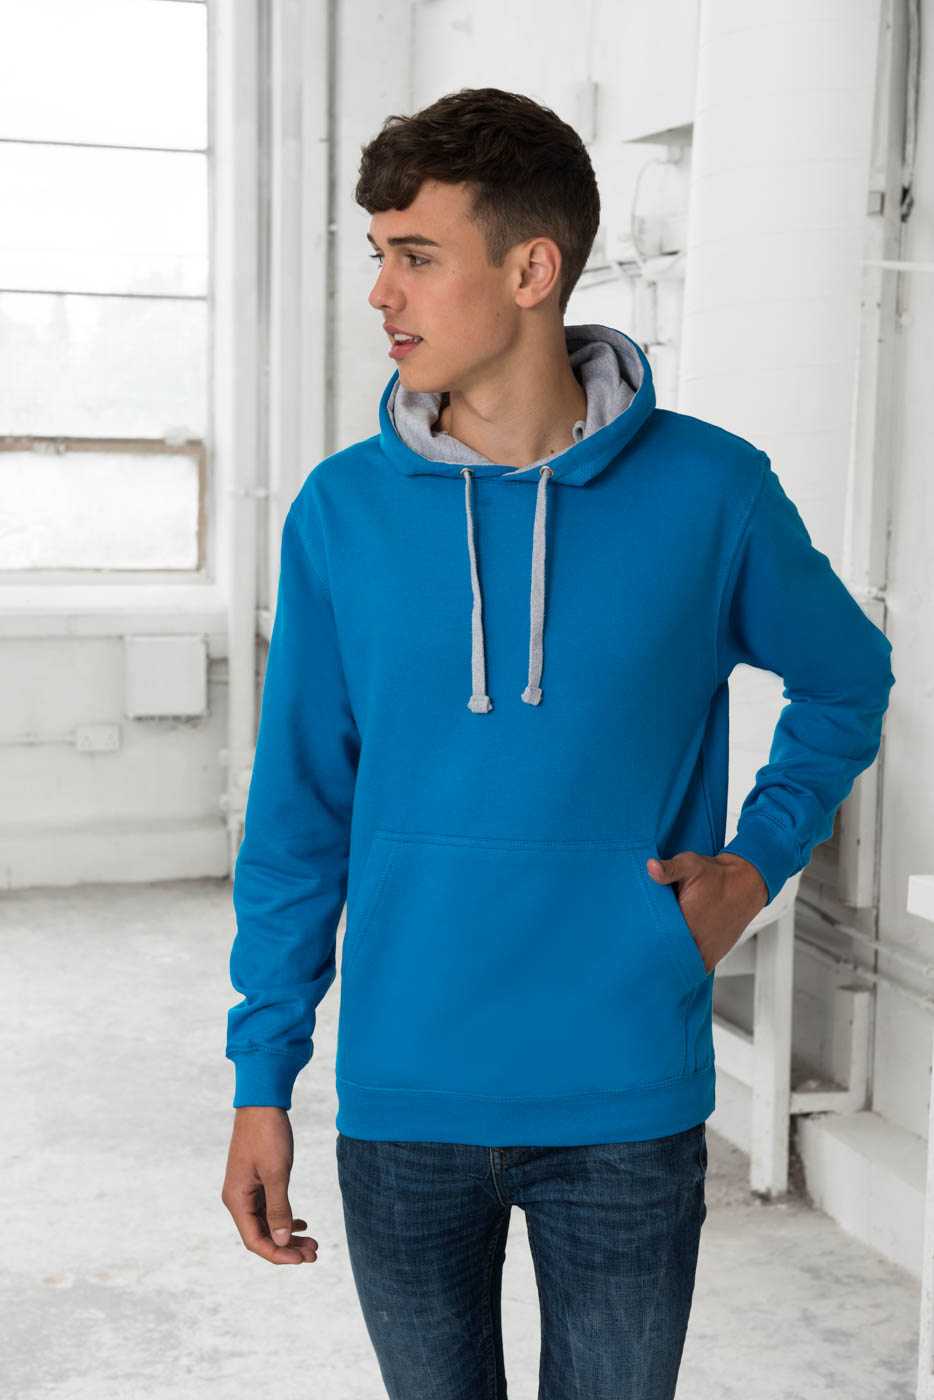 Just Hoods JHA003 Varsity Contrast Hoodie - Sapphire Blue Heather Gray - HIT a Double